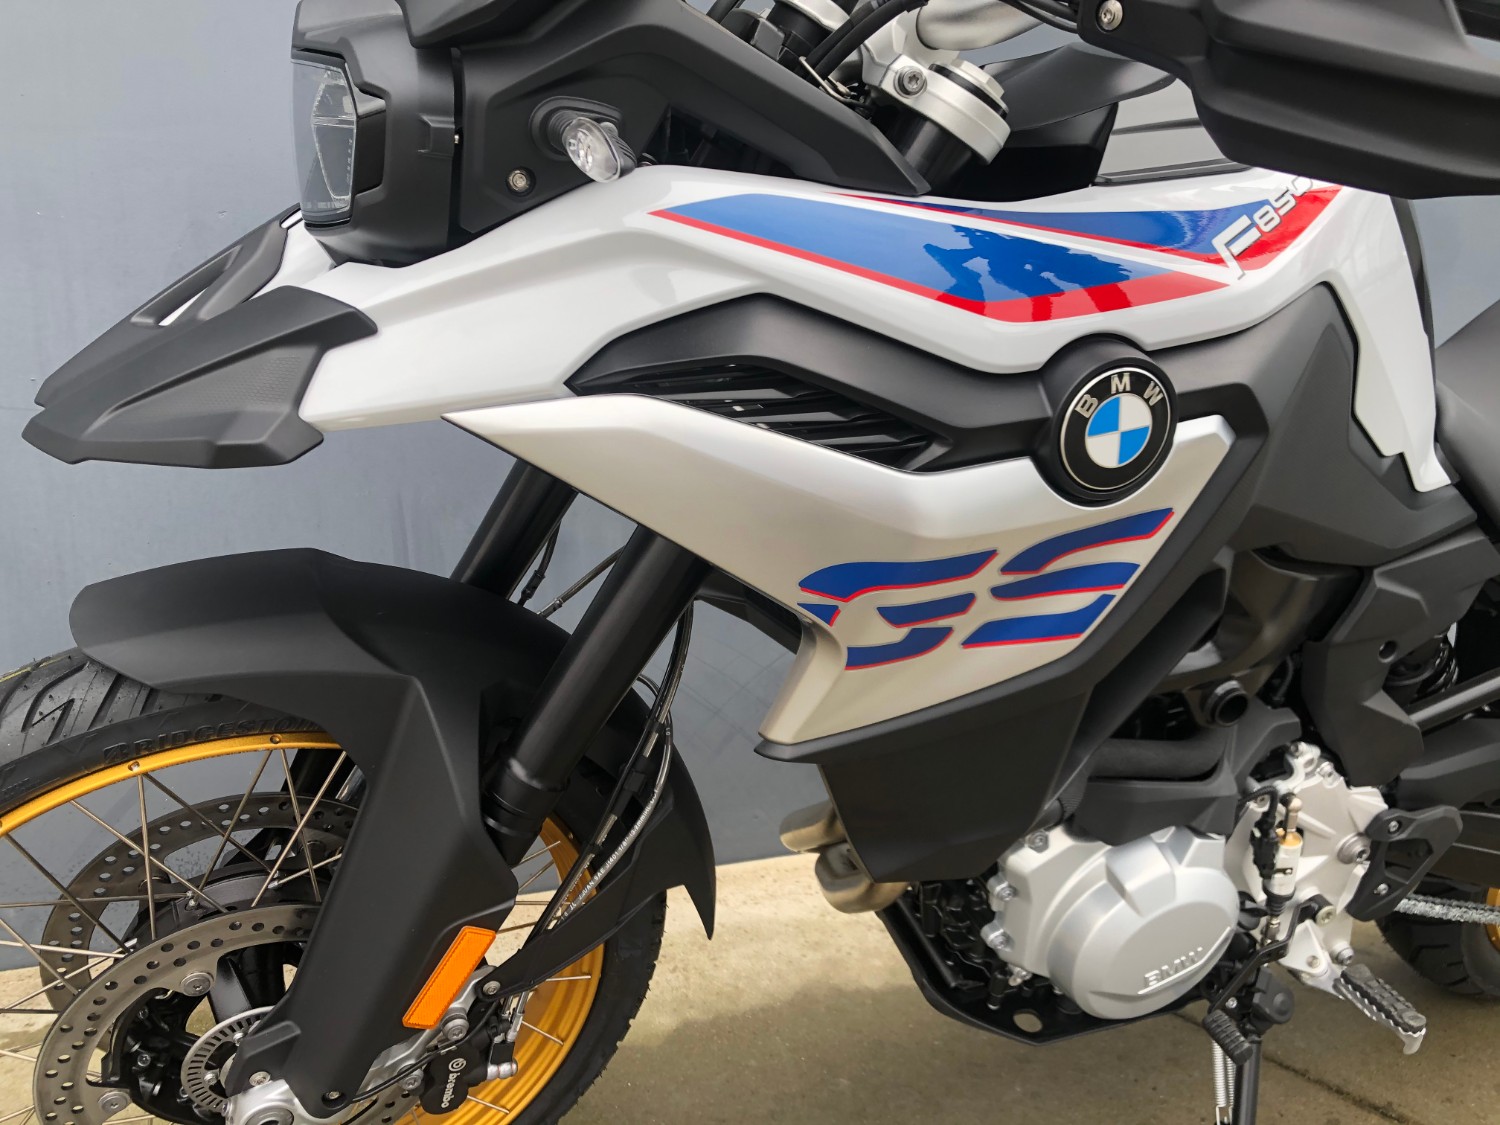 2019 BMW F850GS RallyE Low Suspension Motorcycle Image 13